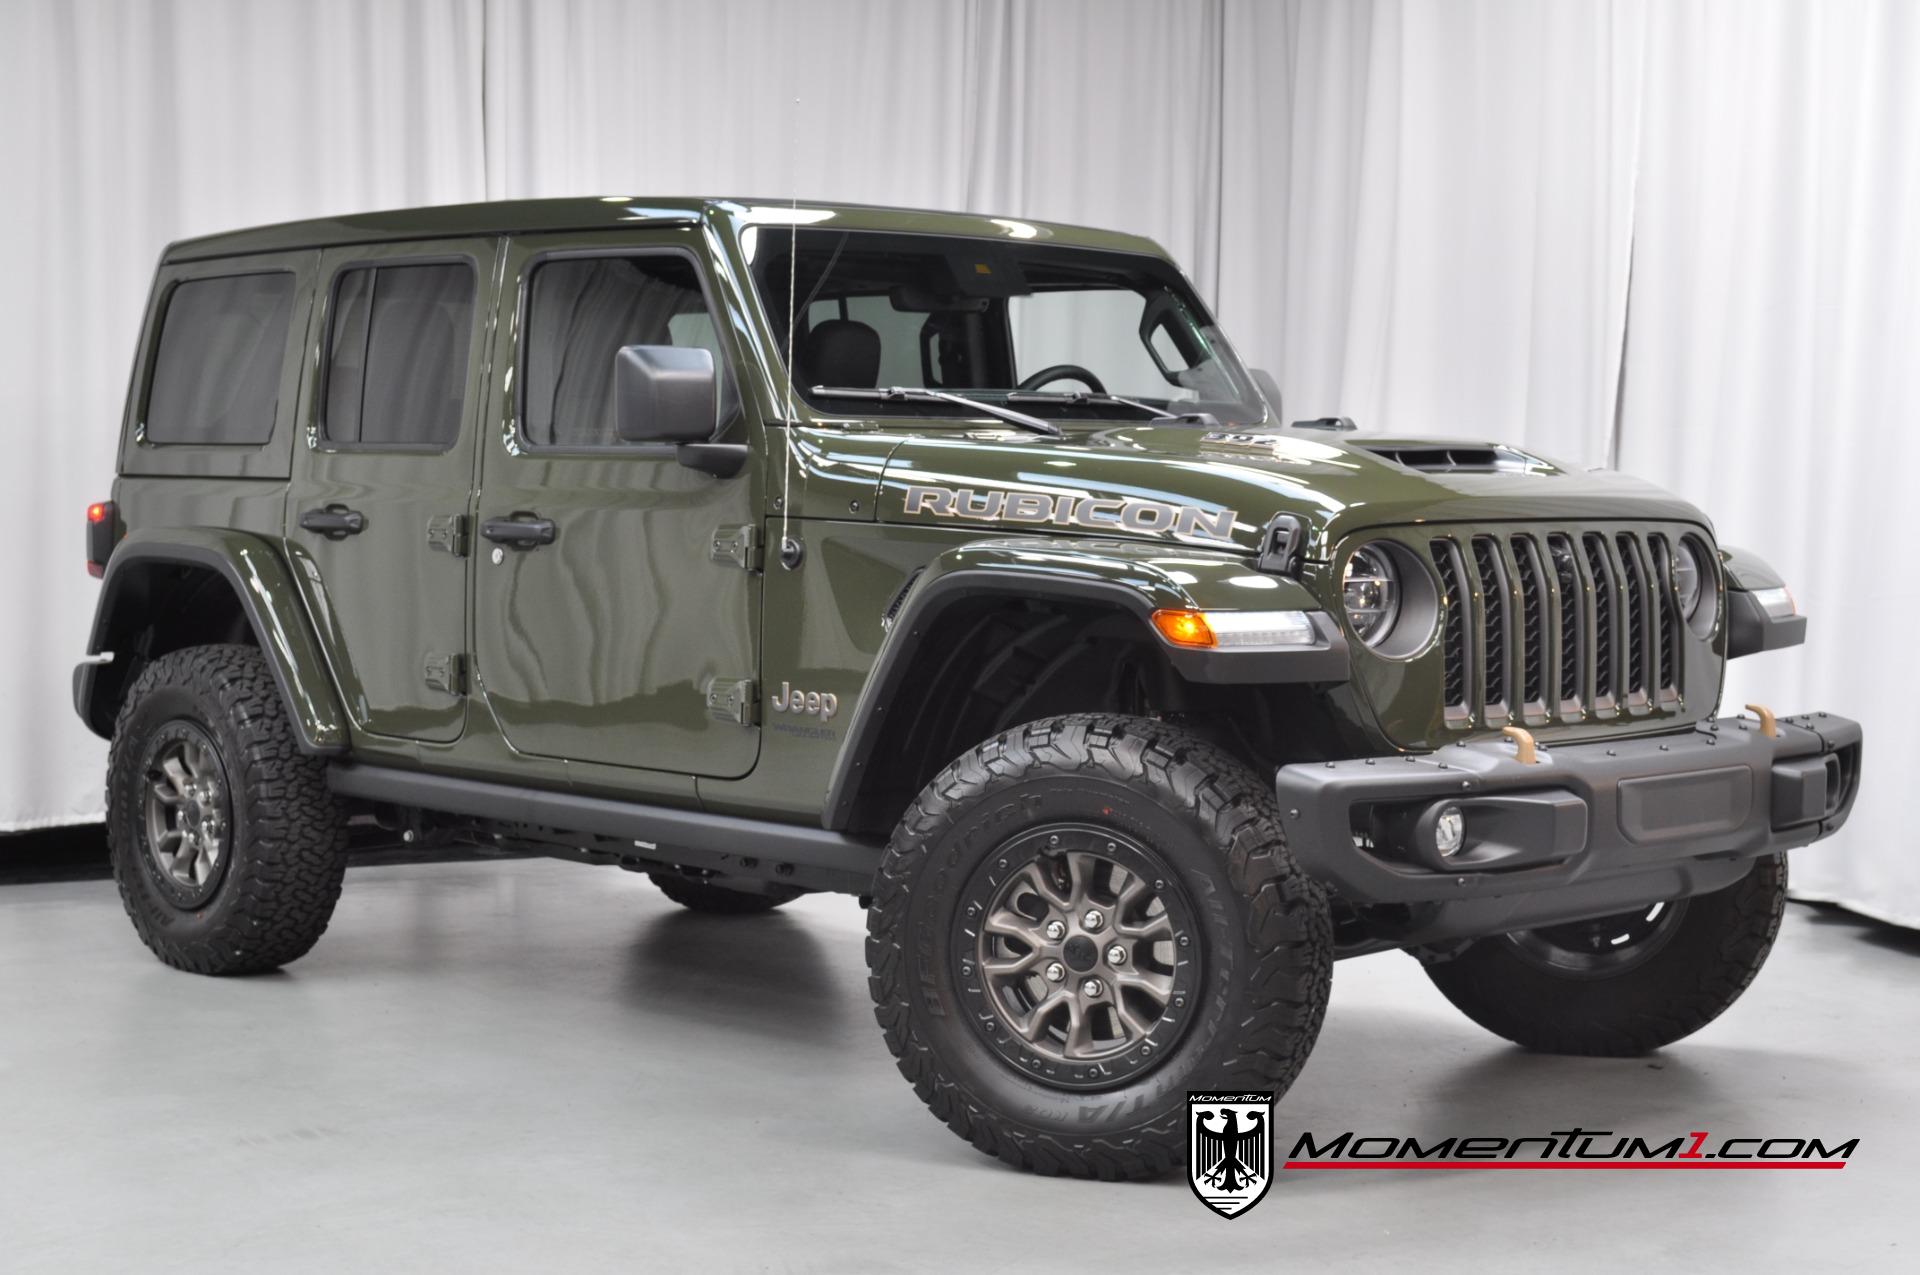 Used 2021 Jeep Wrangler Unlimited Rubicon 392 Skyview Roof For Sale (Sold)  | Momentum Motorcars Inc Stock #858865